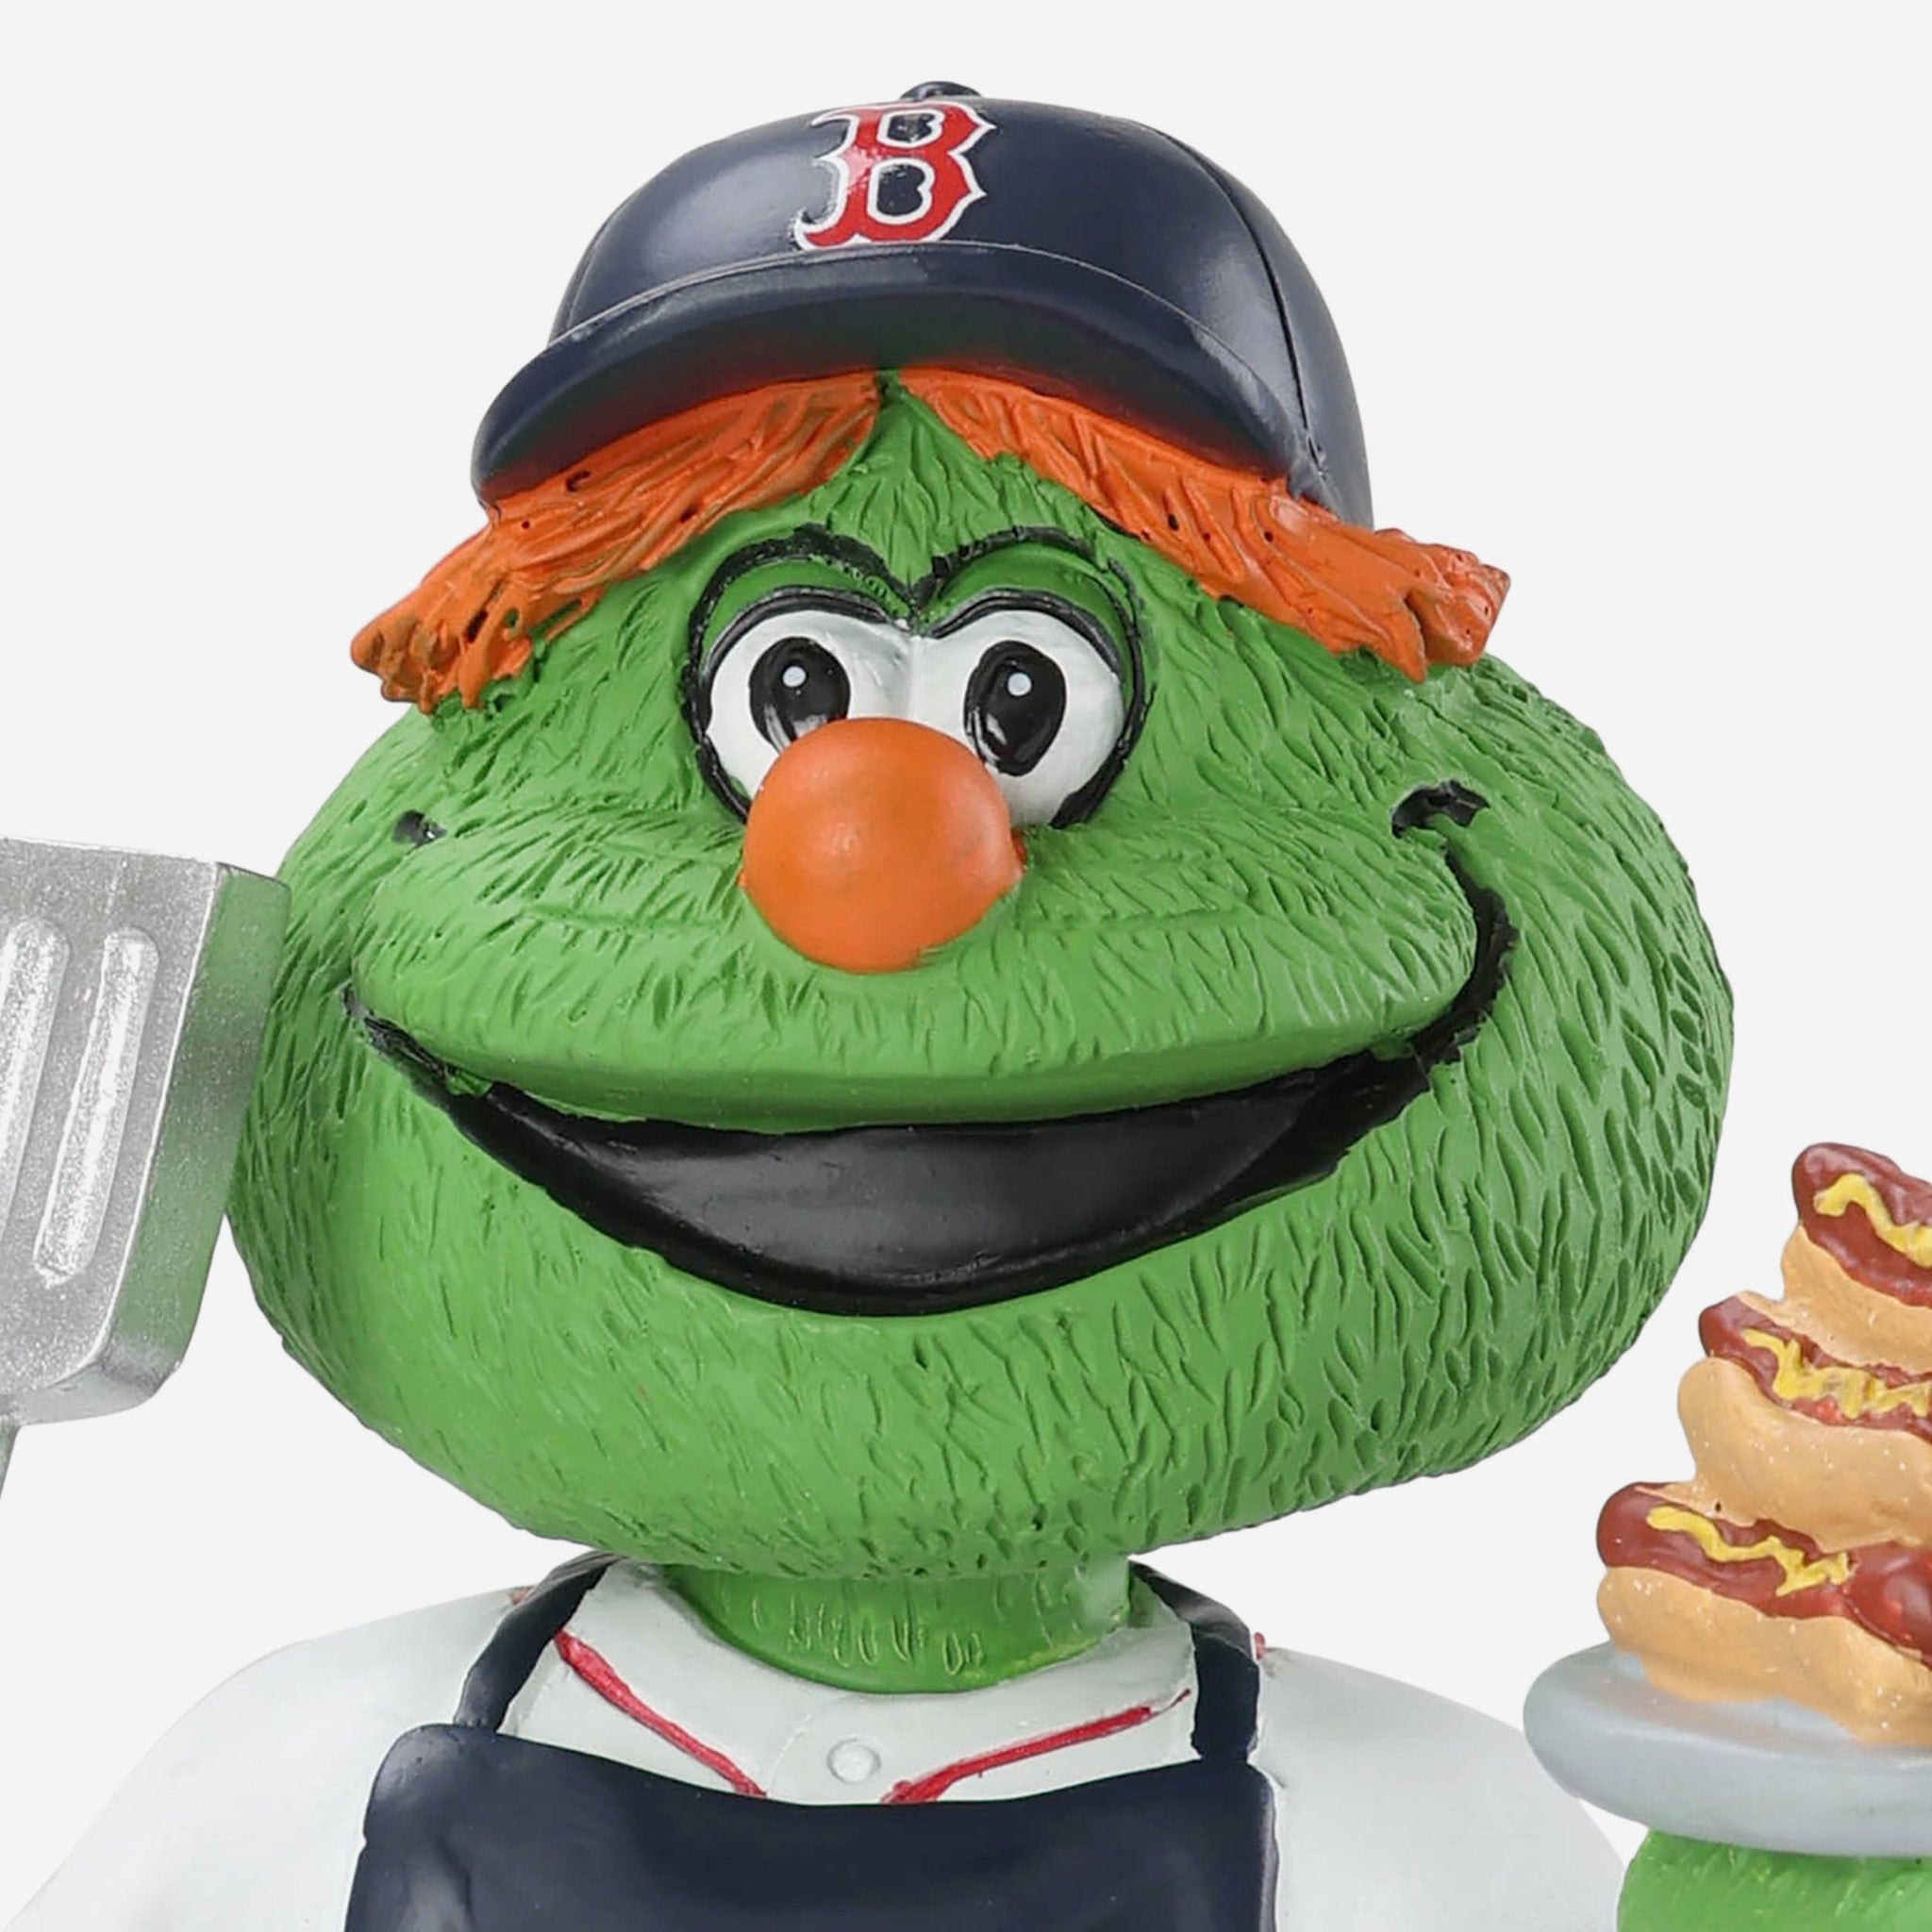 Wally The Green Monster Boston Red Sox Gate Series Mascot Bobblehead Officially Licensed by MLB